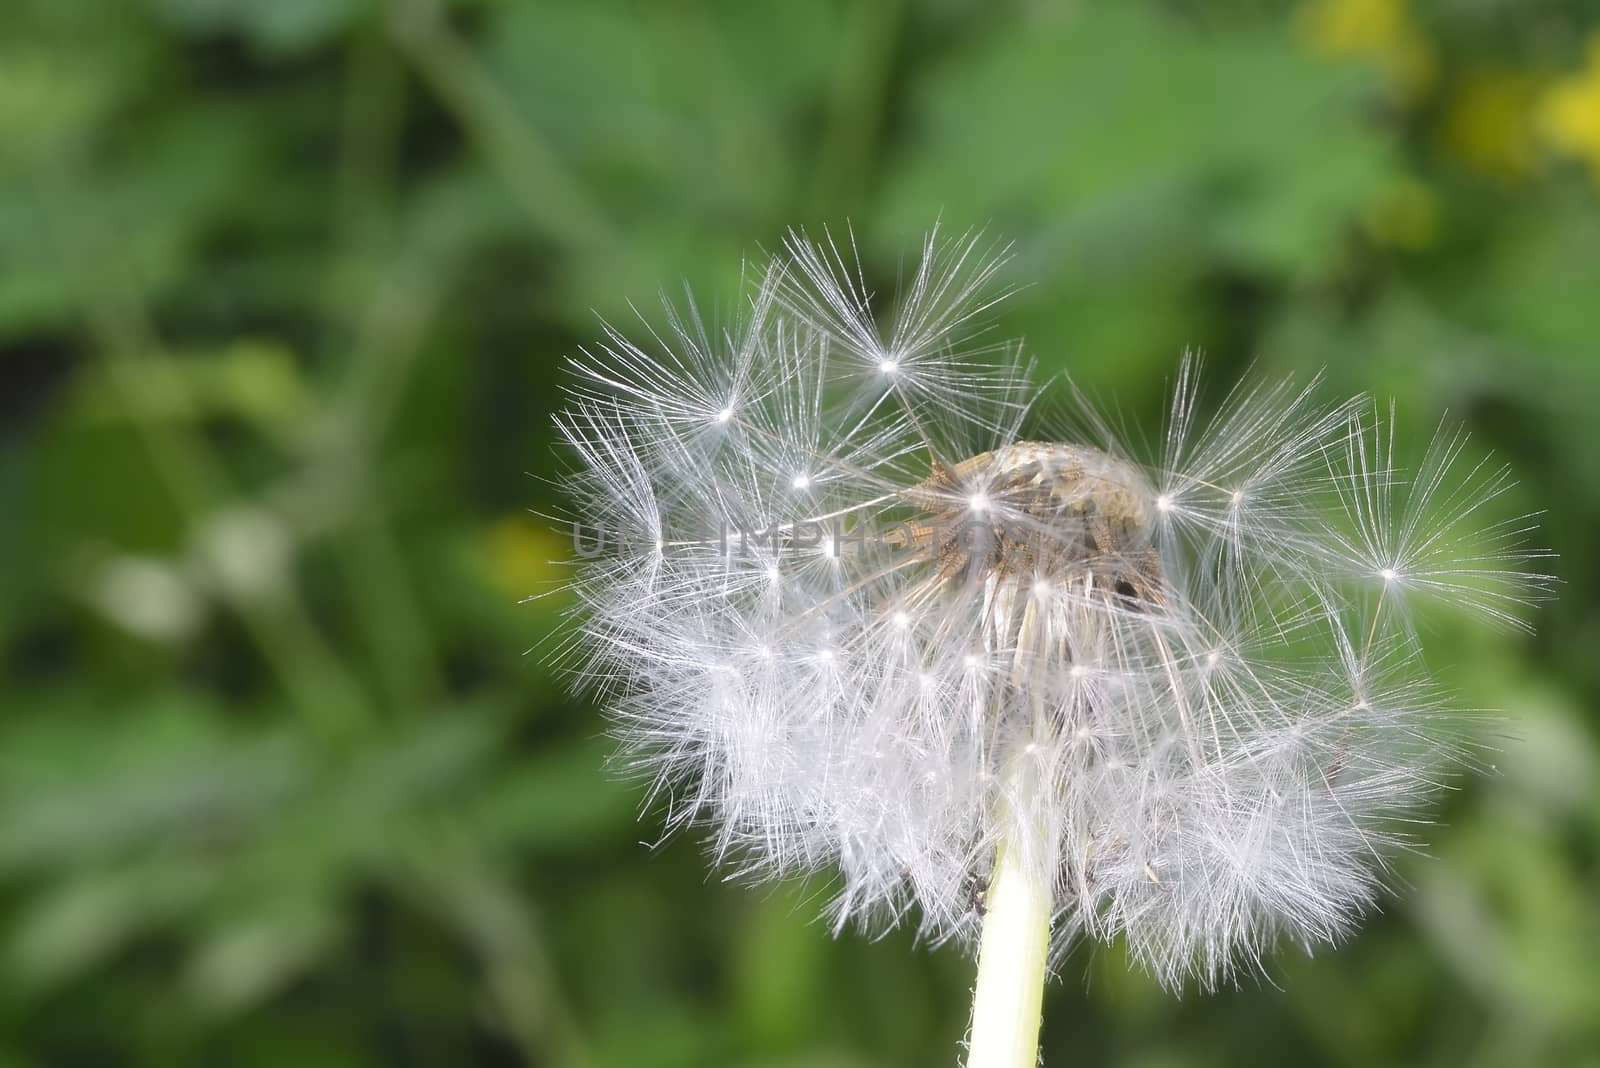 deflorate enlarged Dandelion ( blowball ) with fluff and seeds over green